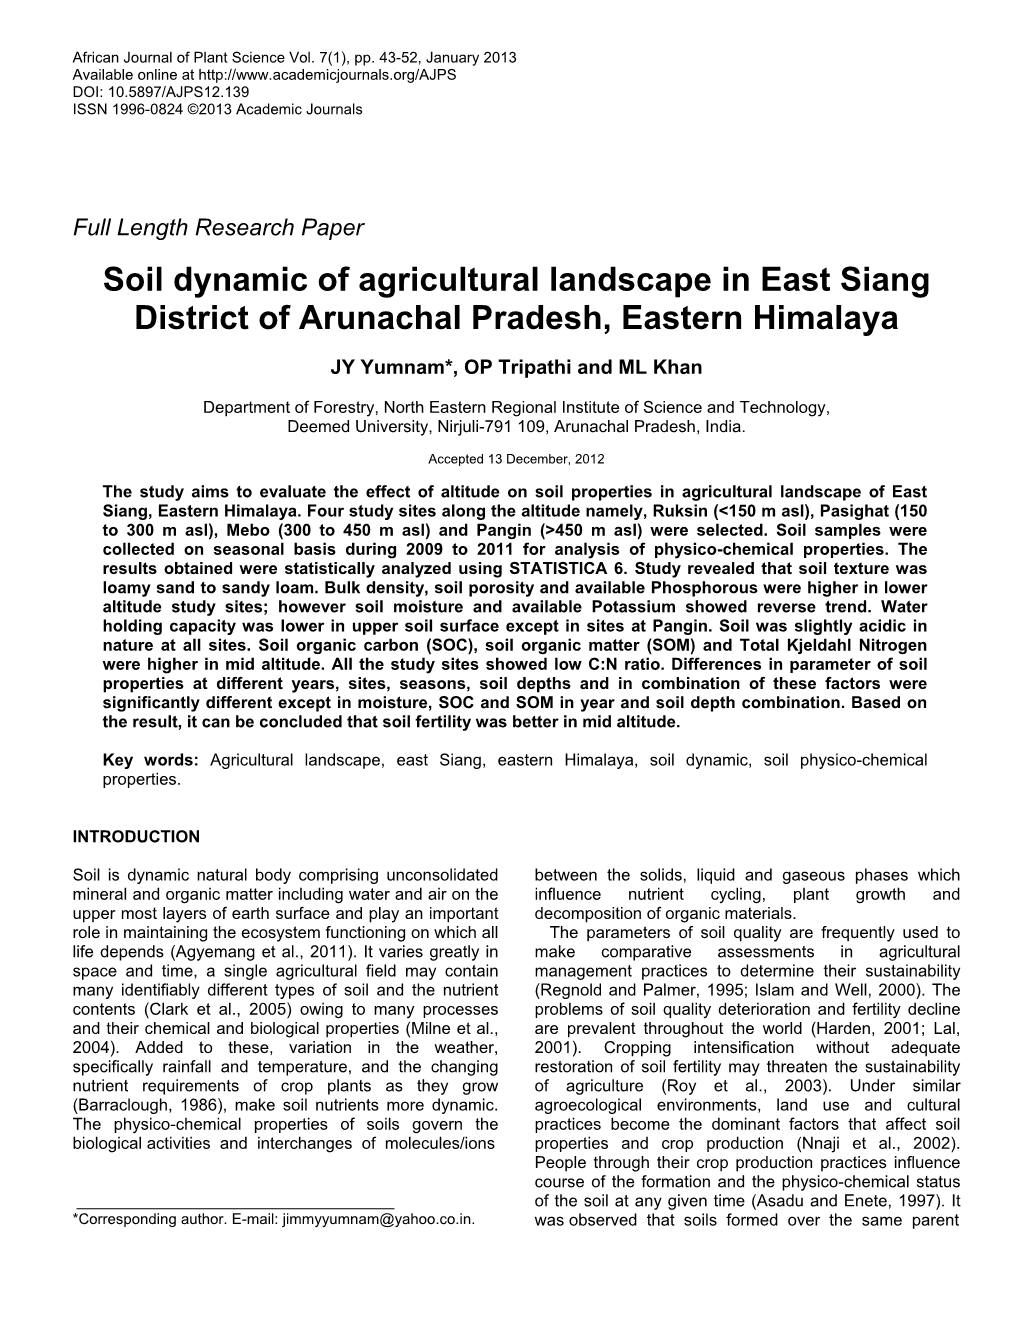 Soil Dynamic of Agricultural Landscape in East Siang District of Arunachal Pradesh, Eastern Himalaya